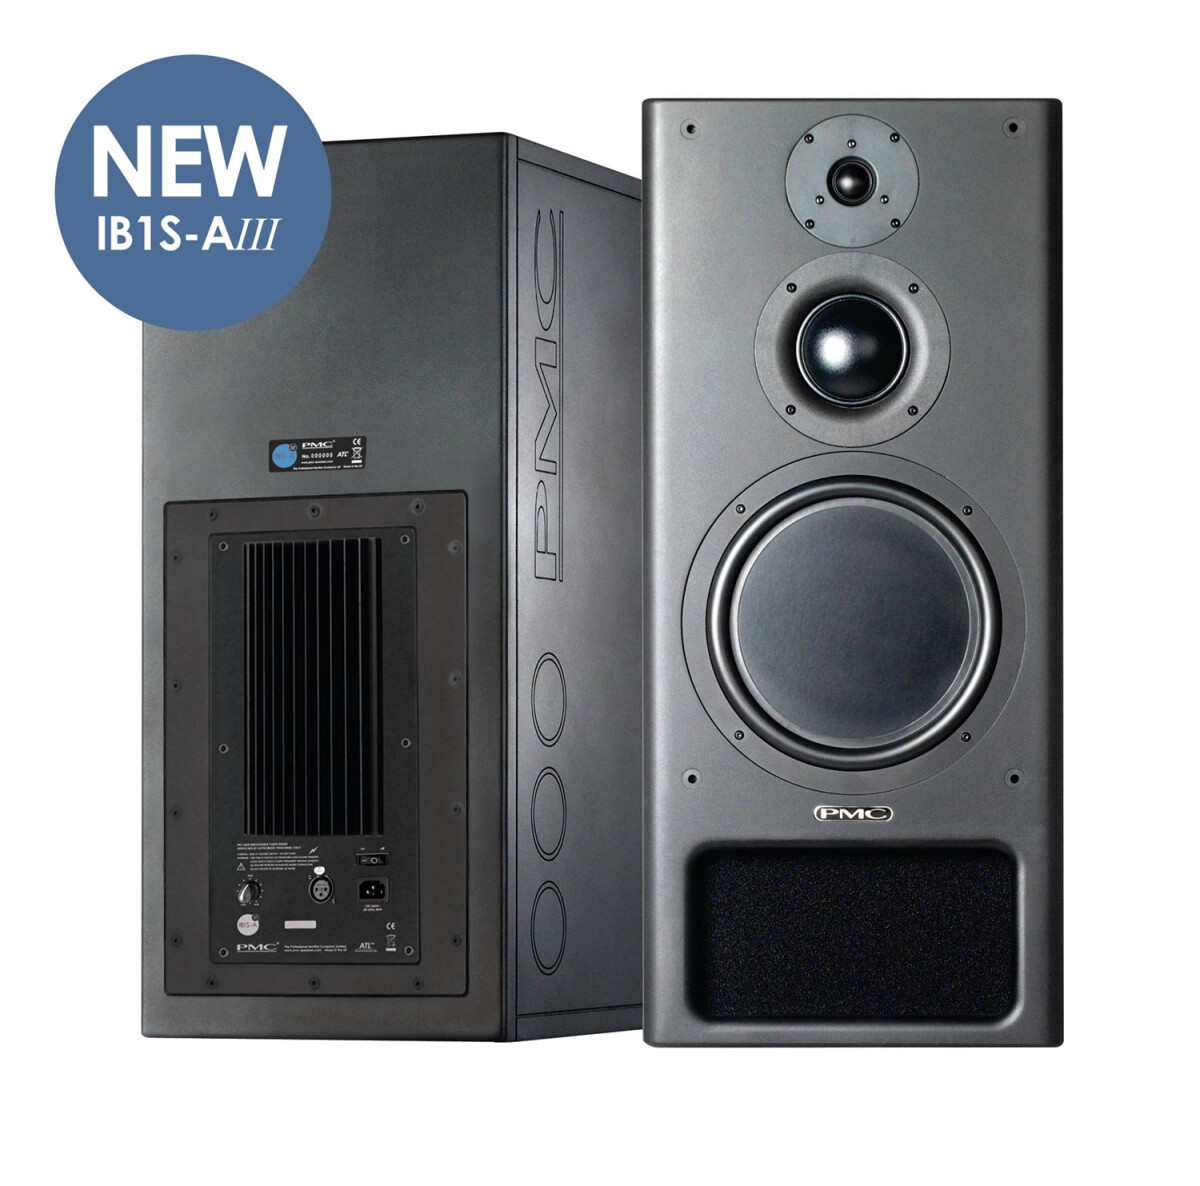 [NAMM] PMC to launch IB1S-AIII reference monitor